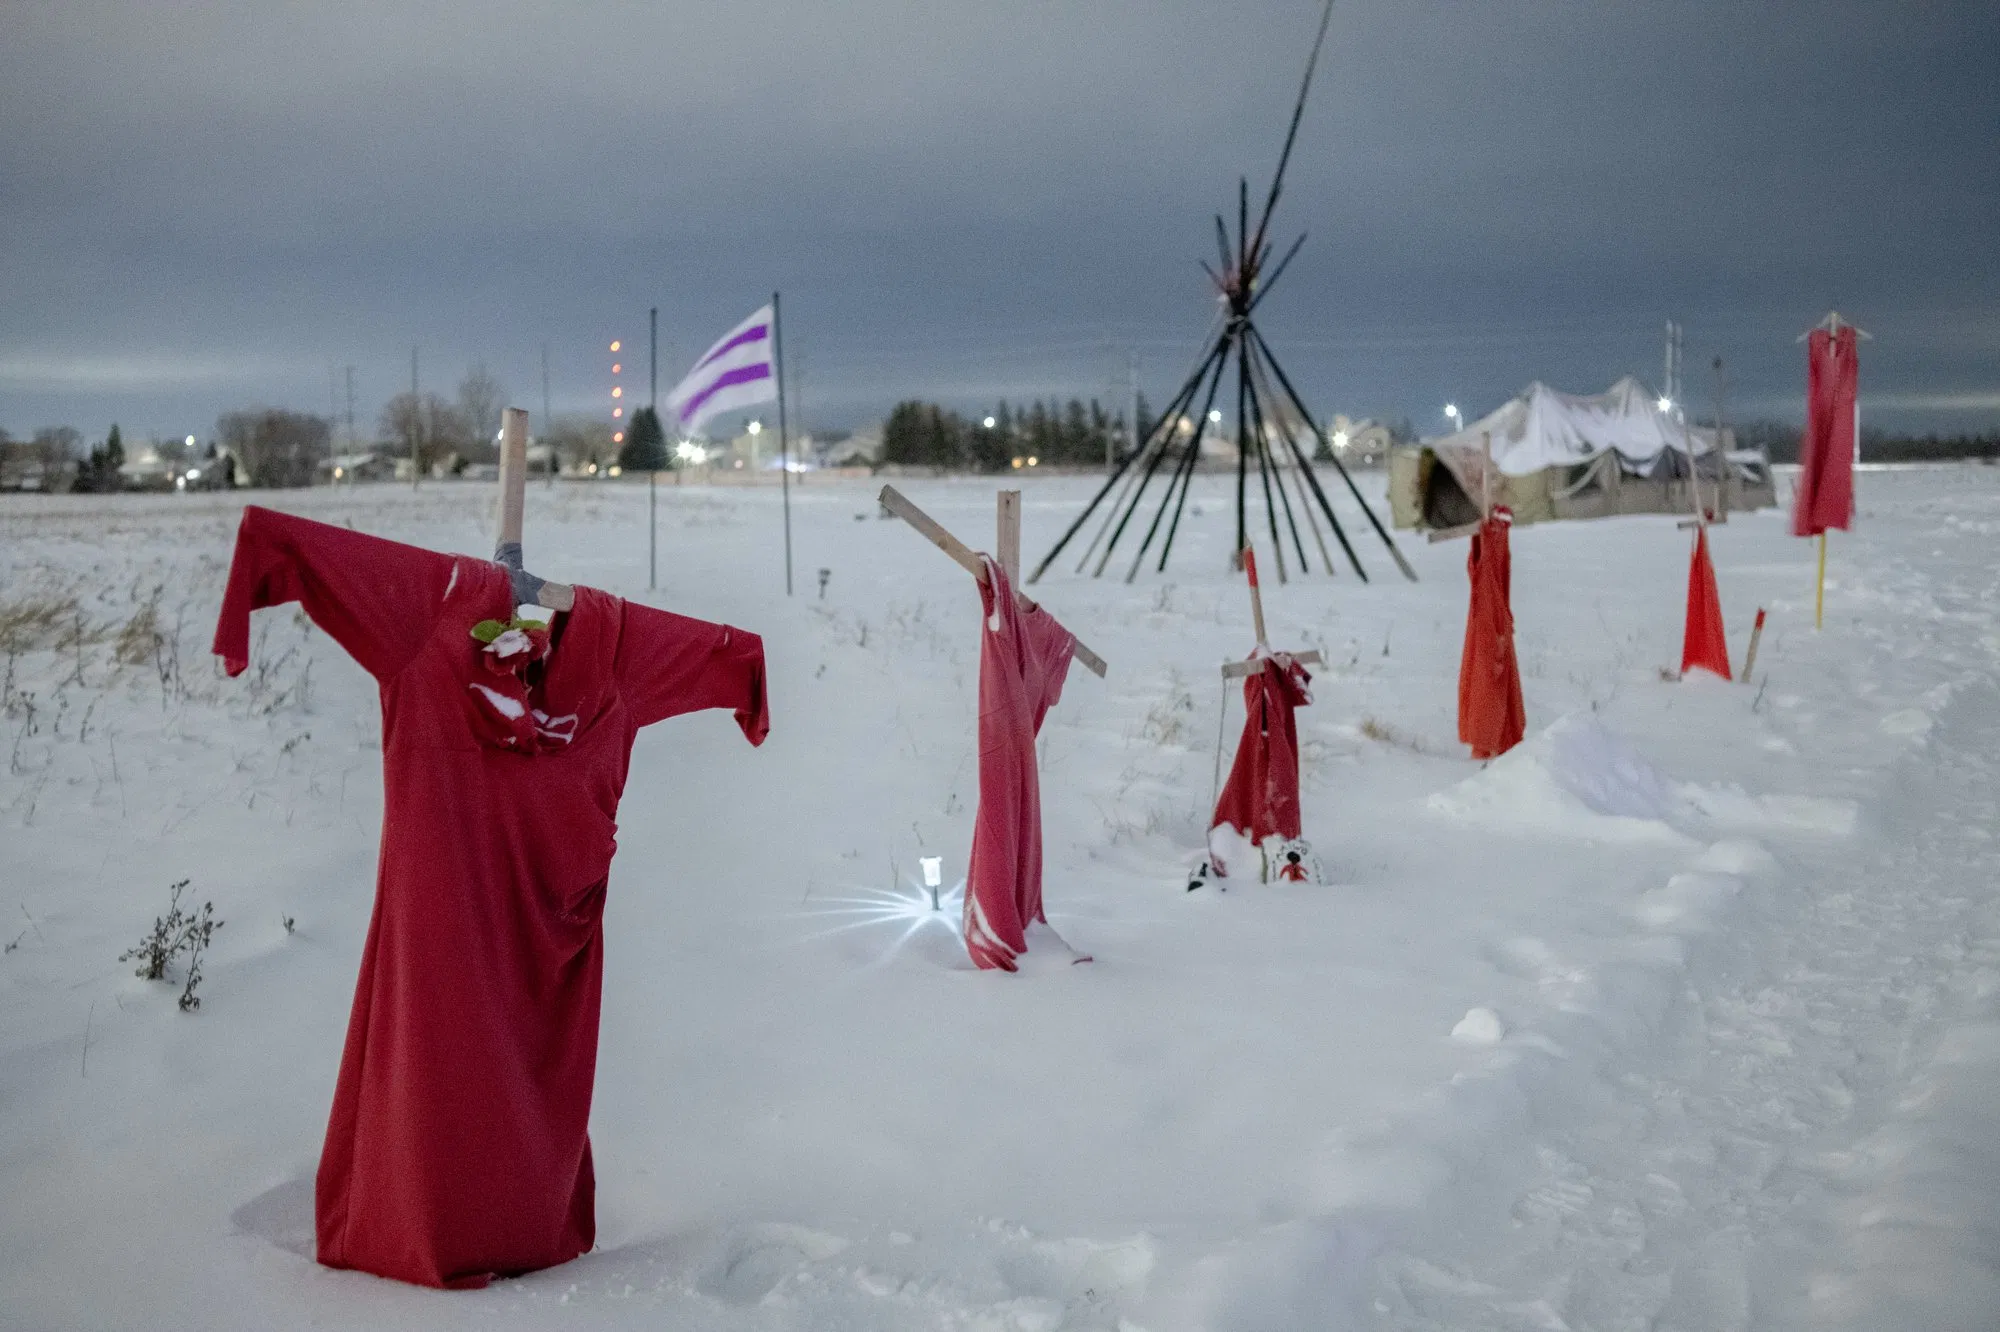 A picture of red dresses hanging in the snow